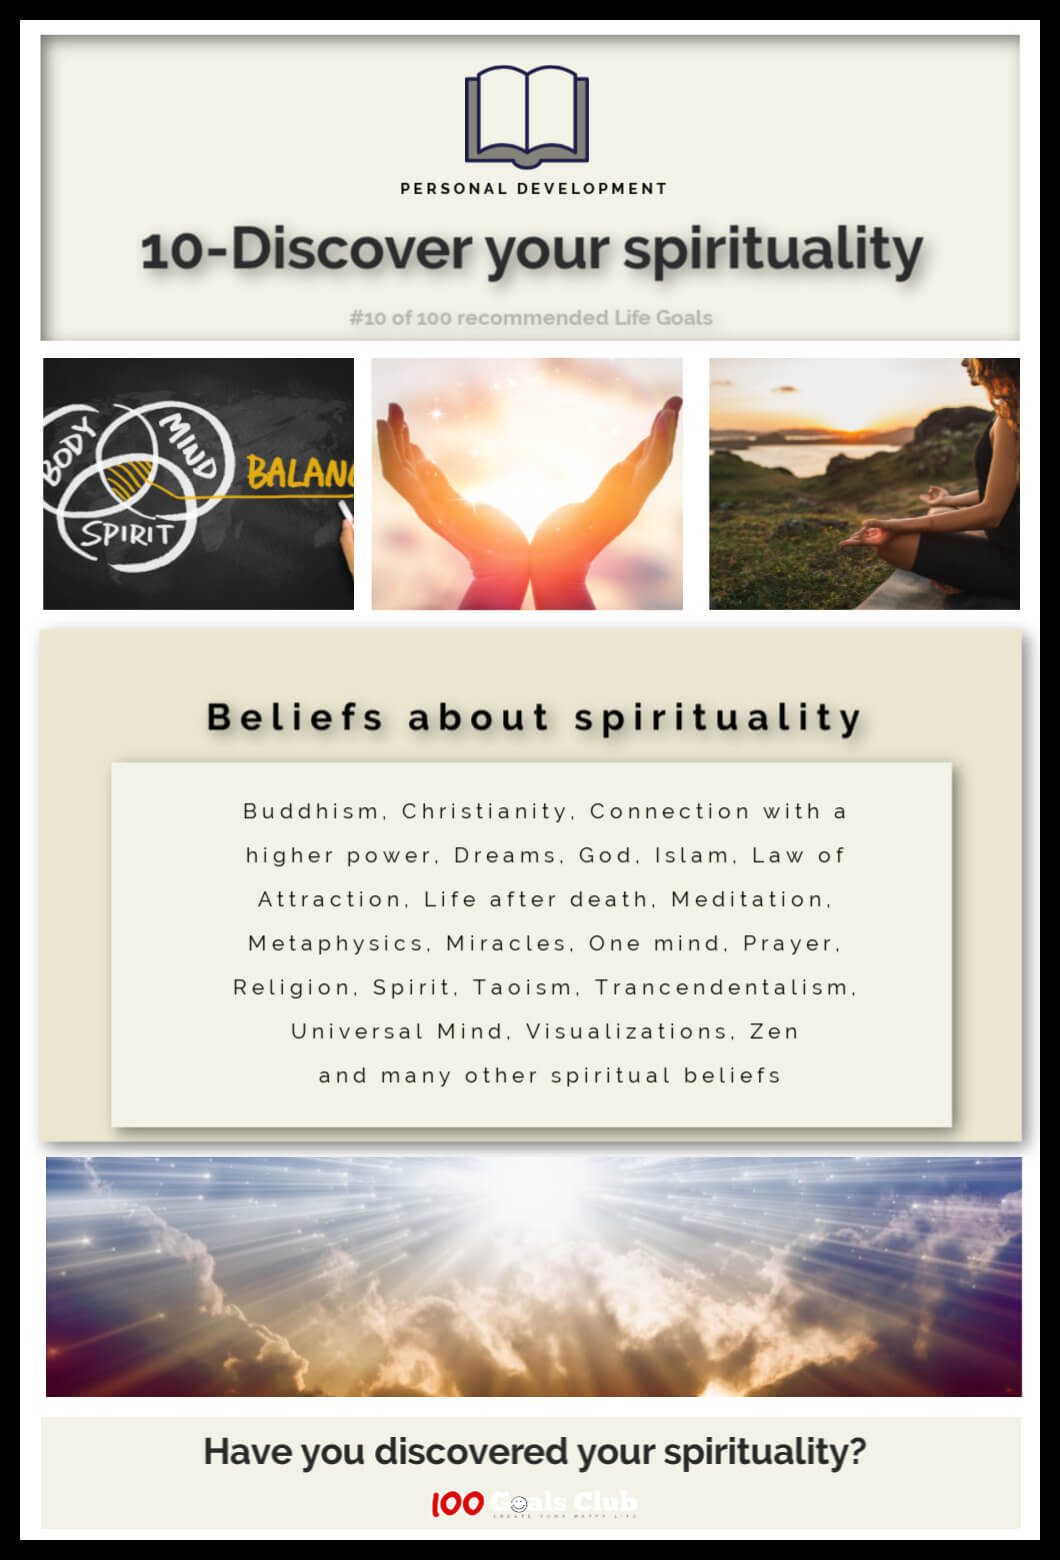 It is said that we all have a mind, a body, and a spirit.  It is important to discover your spirituality. It is tangible to understand one’s mind and body, but the spirit is more allusive and the subject of many interpretations and beliefs.